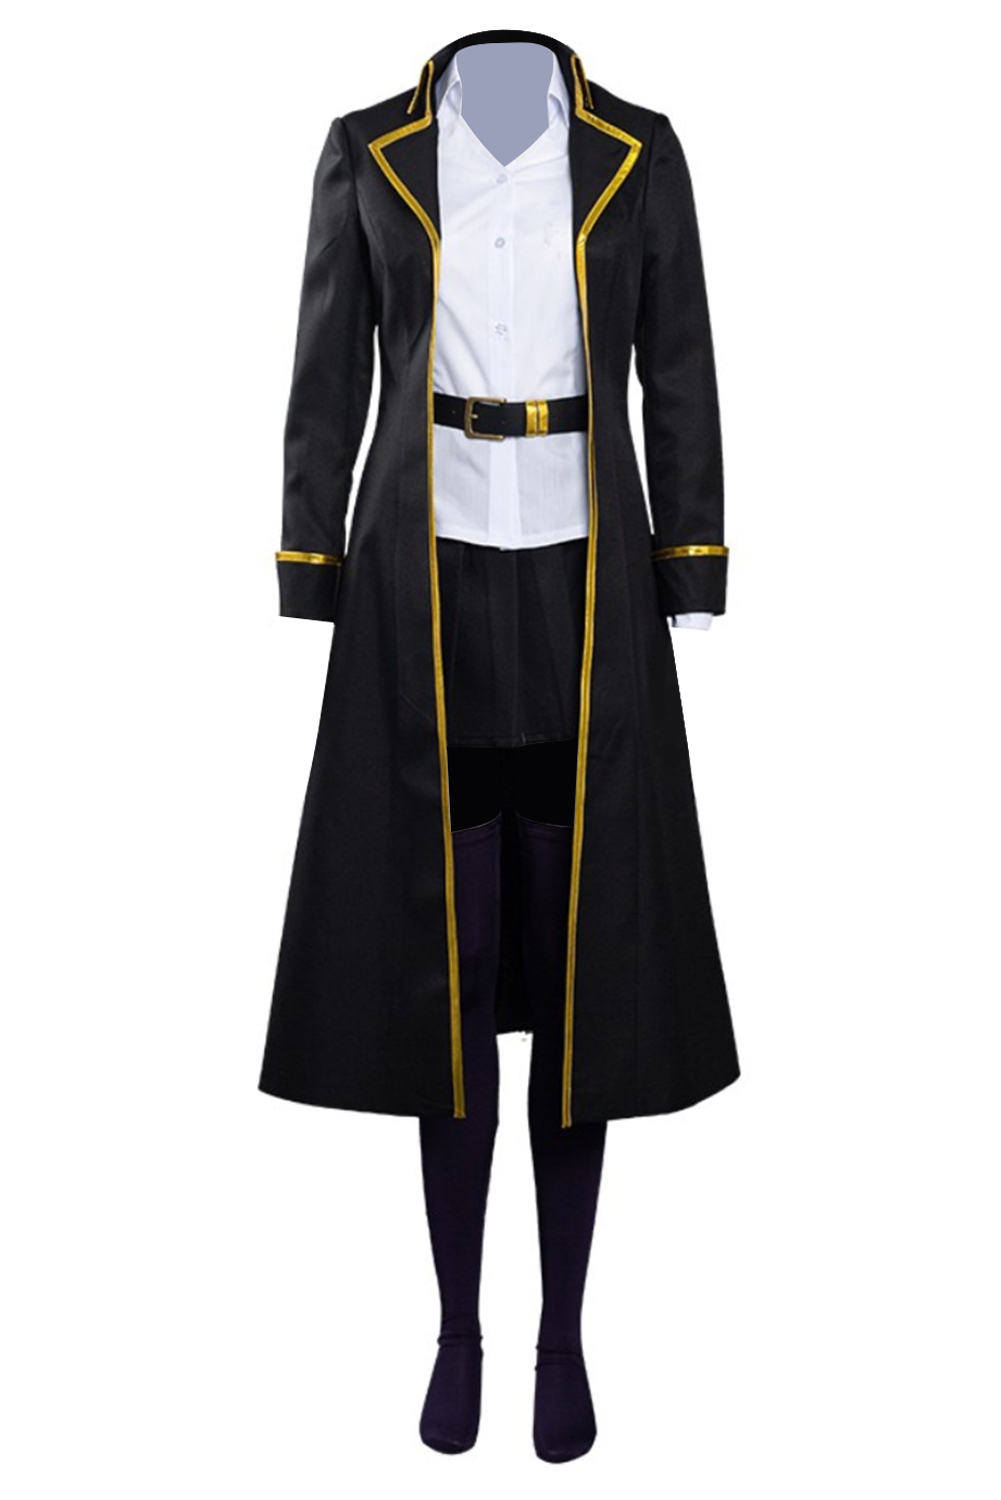 Anime That Time I Got Reincarnated as a Slime Shion Wind Jacket Set Outfits Halloween Carnival Suit Cosplay Costume